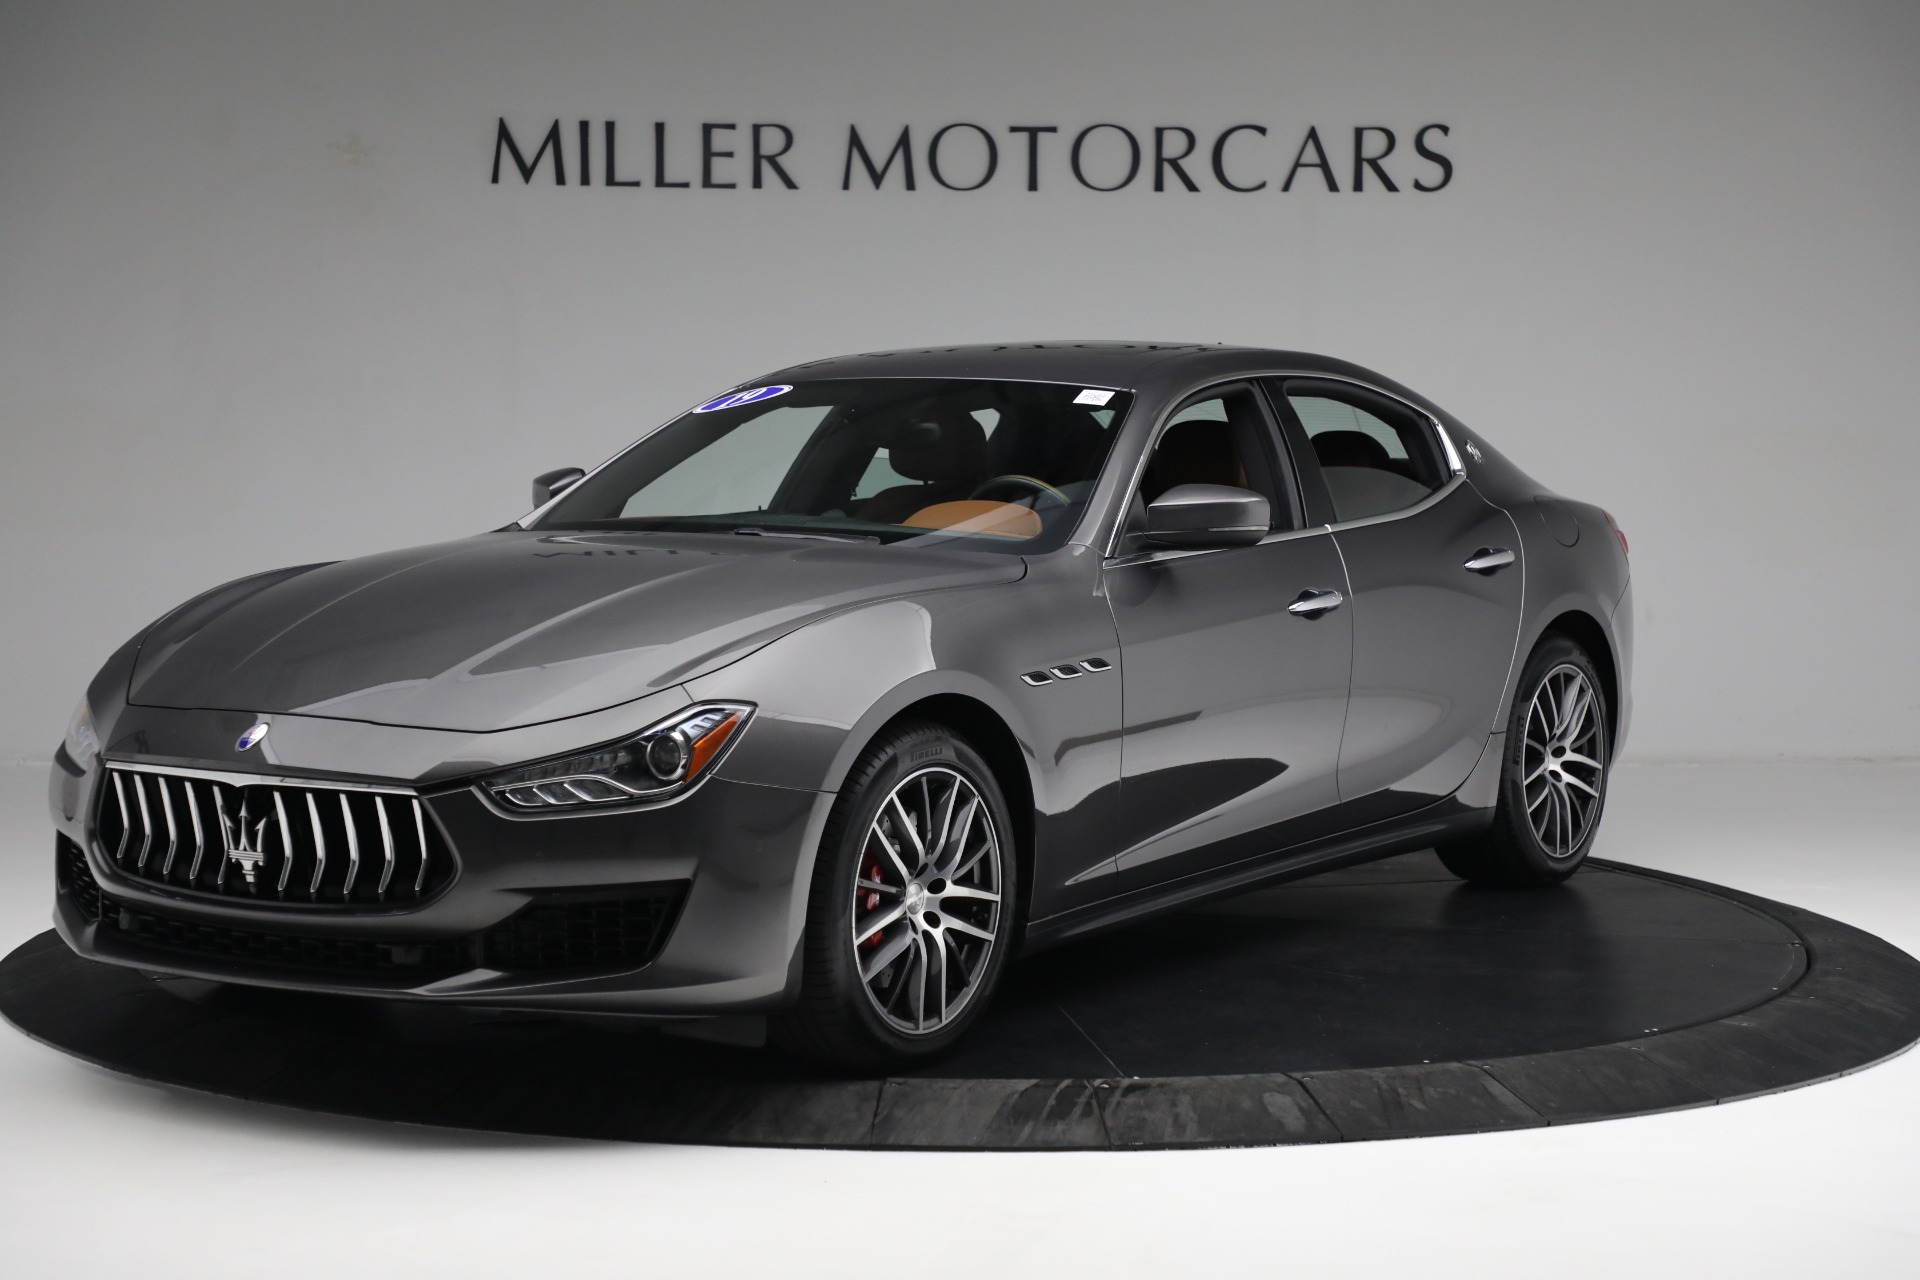 Used 2019 Maserati Ghibli S Q4 for sale $57,900 at Bentley Greenwich in Greenwich CT 06830 1